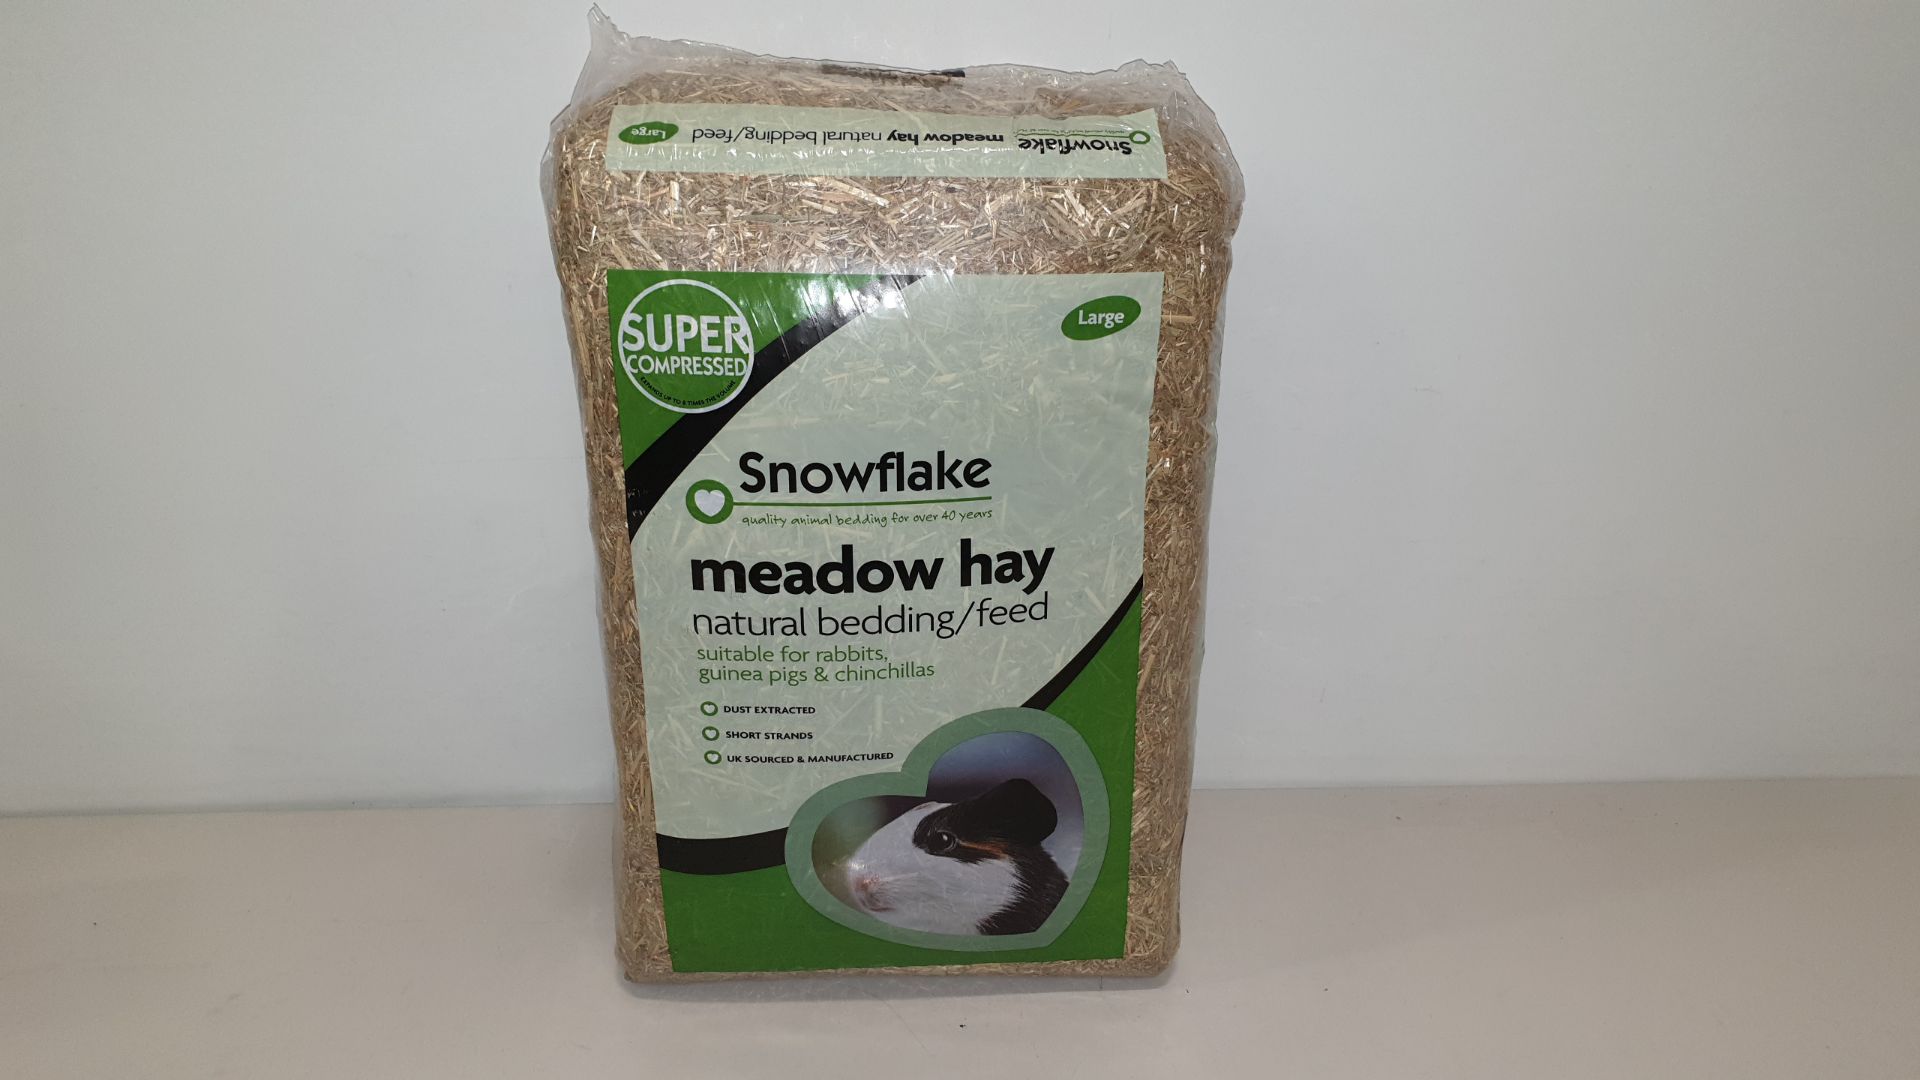 48 X 3KG (SNOWFLAKE) MEADOW HAY NATURAL BEDDING/FEED - CONTAINED ON A FULL PALLET